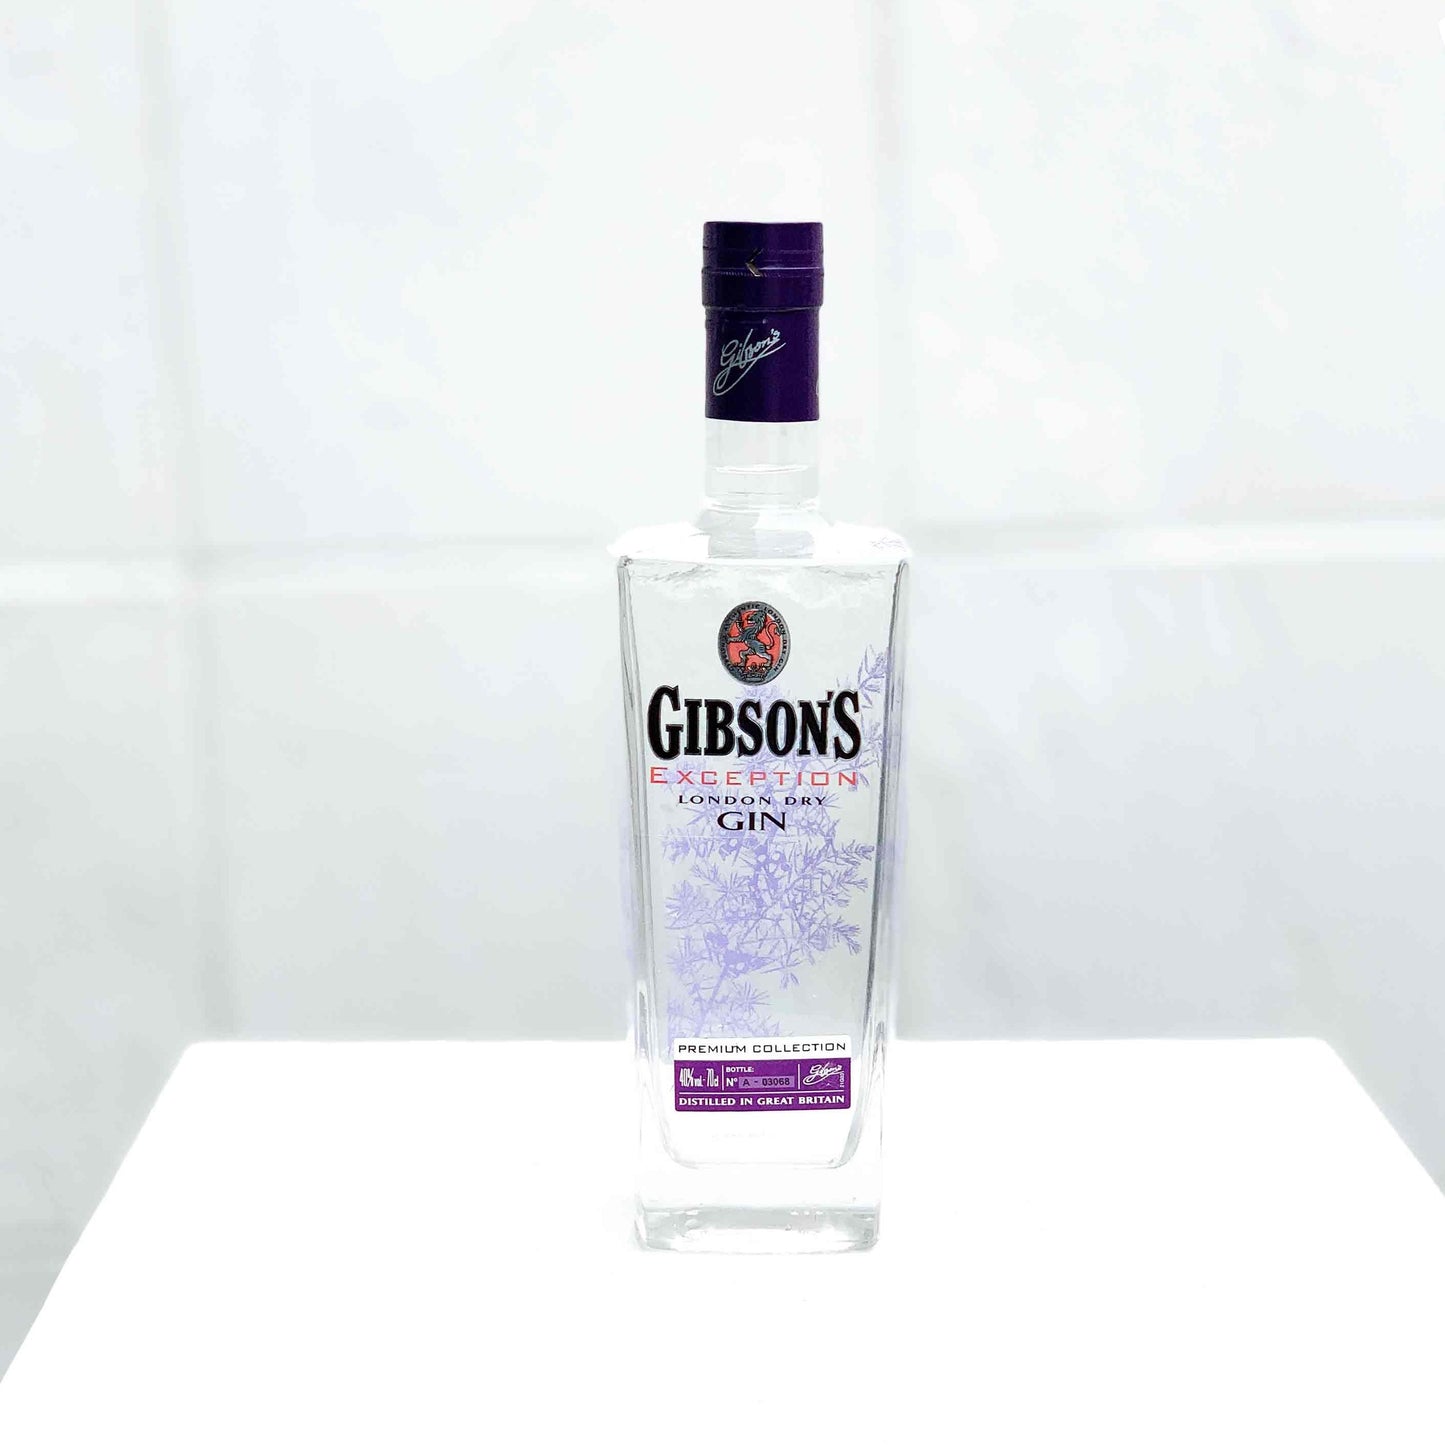 Gibson's Exception Gin